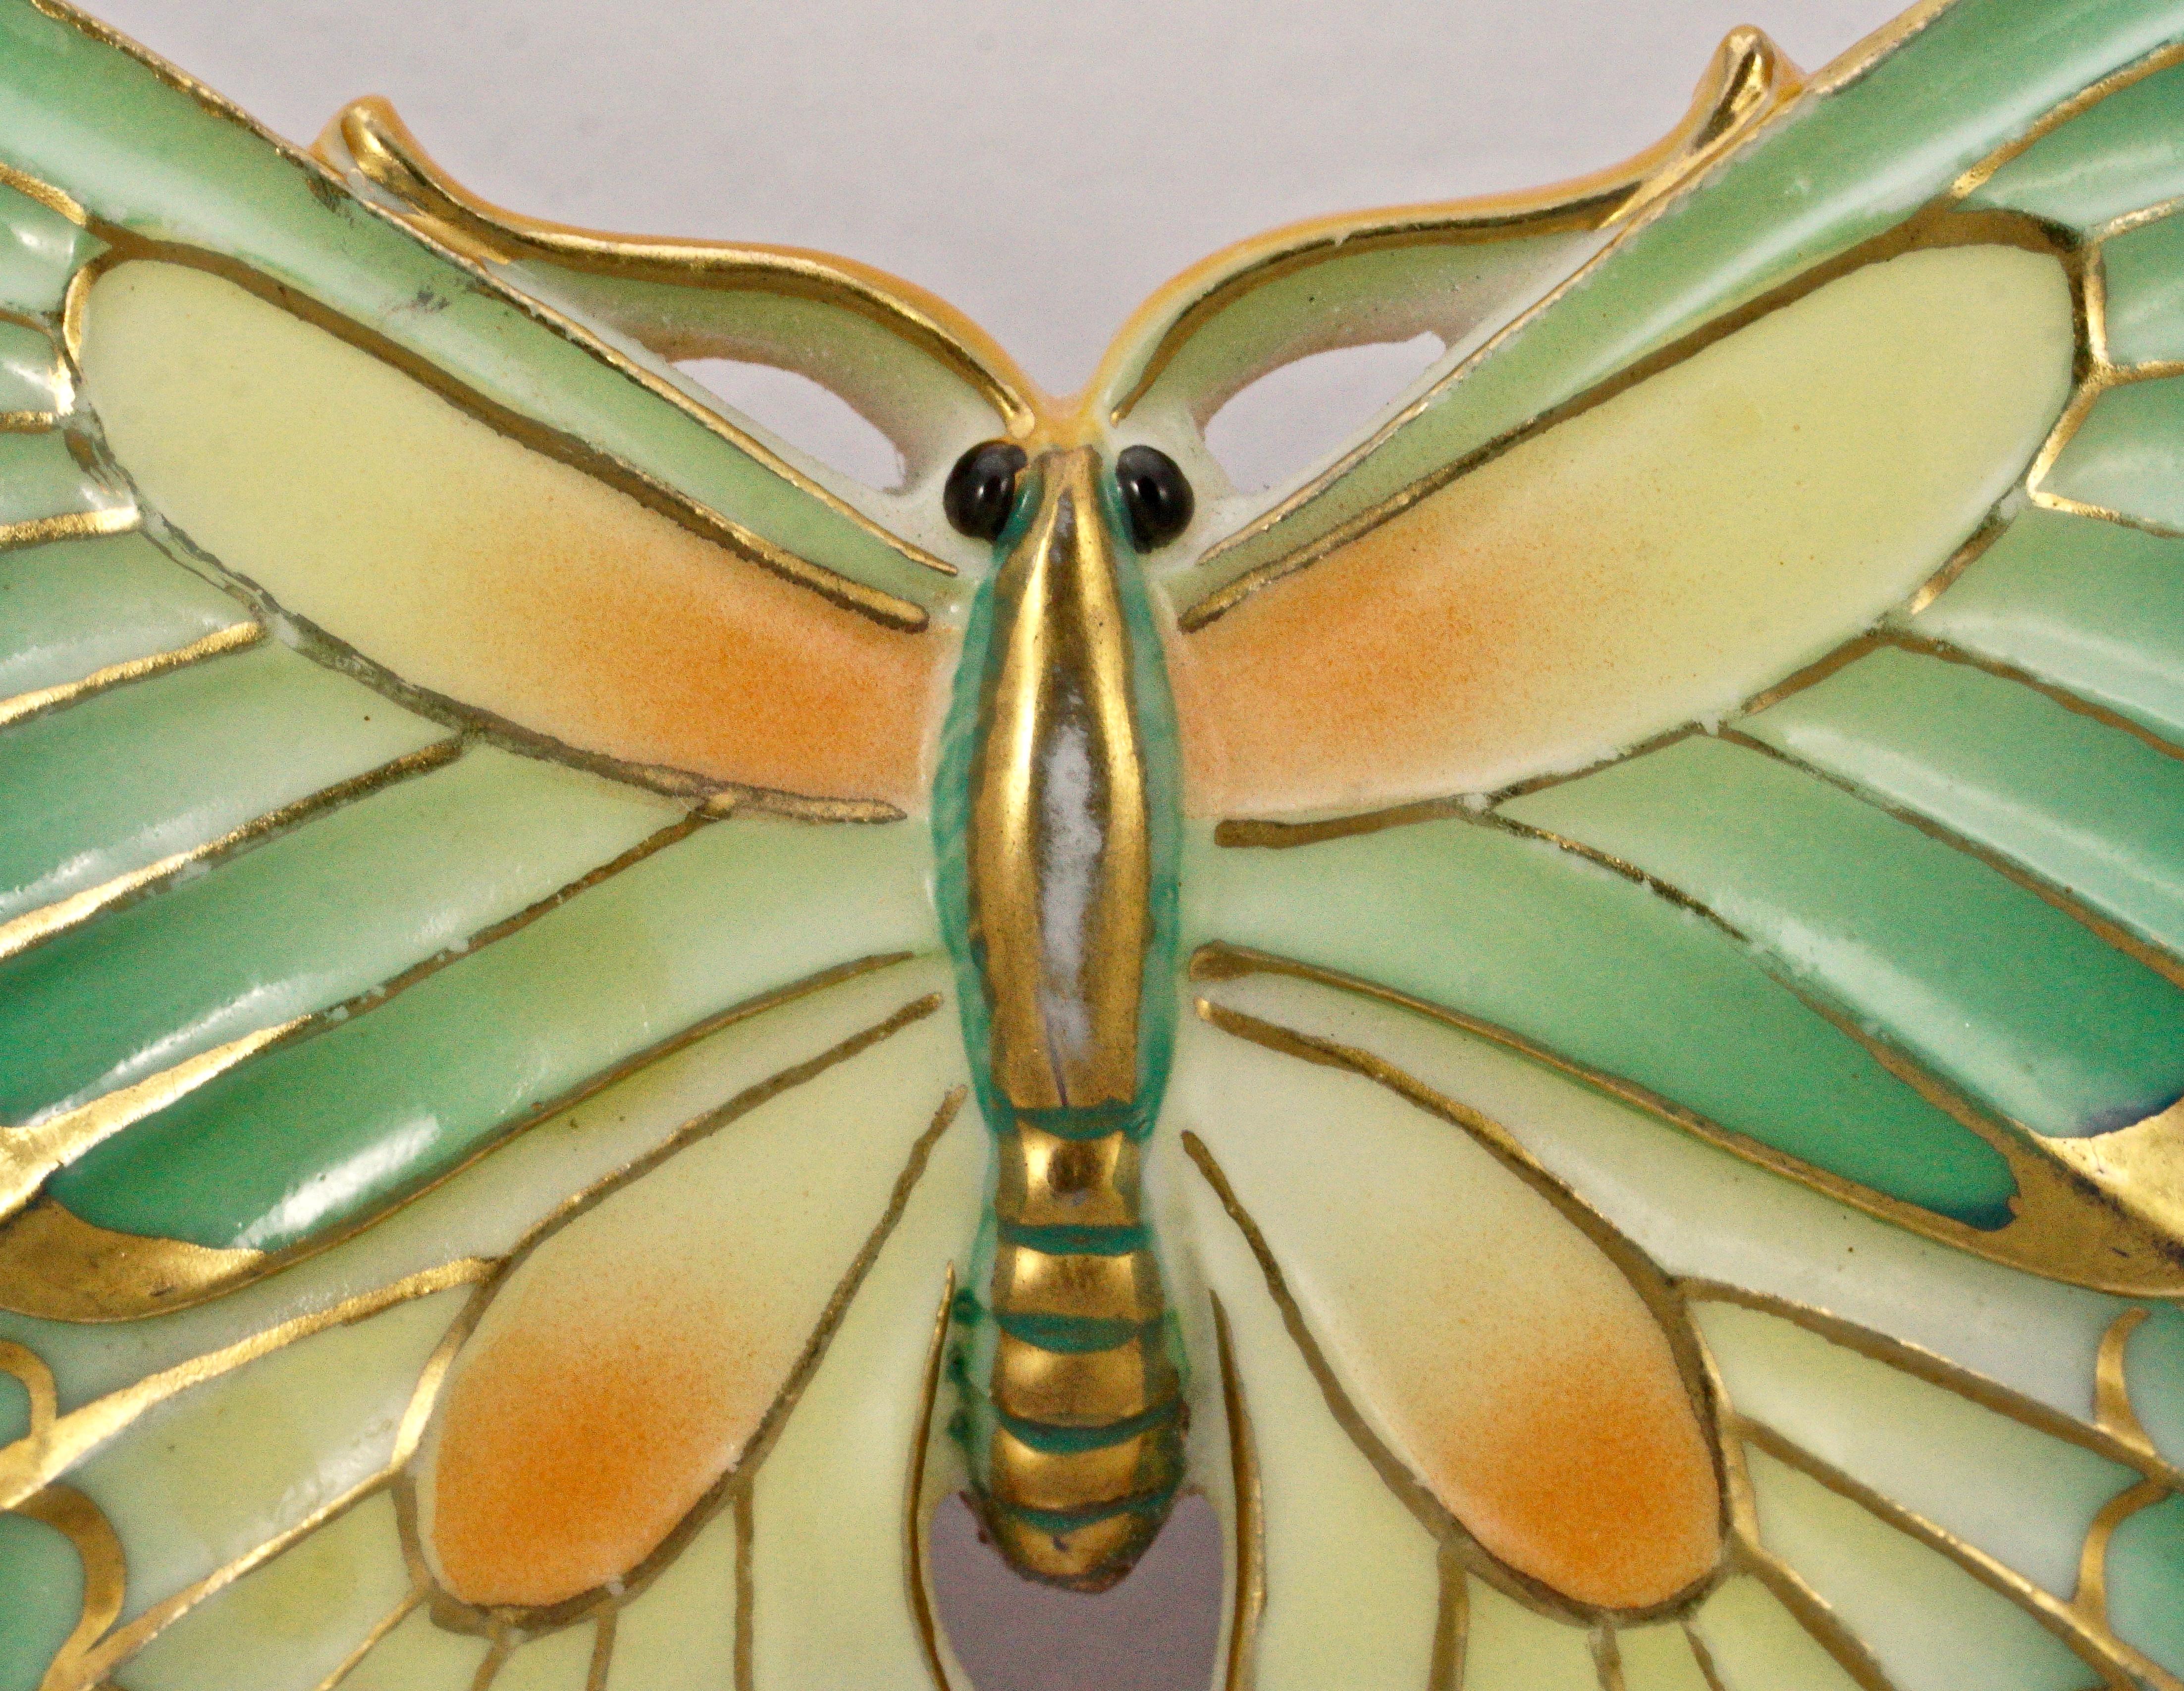 Toshikane Japan exquisite porcelain butterfly brooch, featuring vibrant green, yellow, and orange enamel with gold, blue and red highlights, all done by hand. The back is silver tone. Measuring maximum width 5.2cm / 2.04 inches by length 3.8cm / 1.5